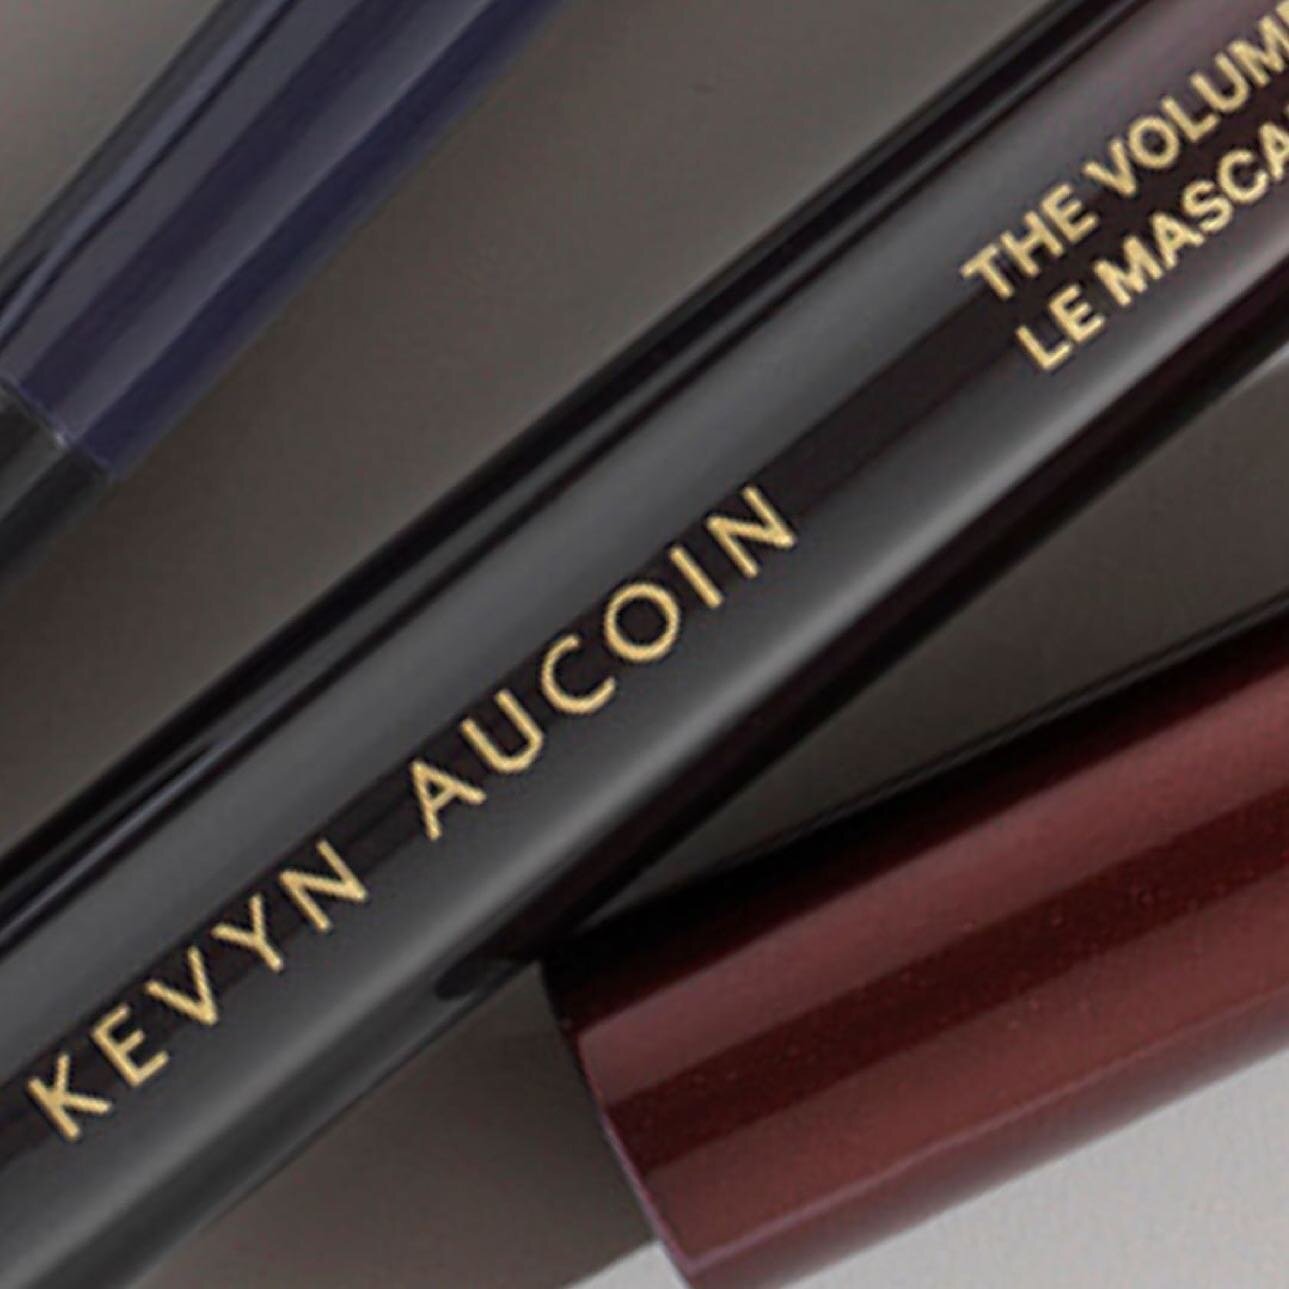 Created by the legendary Kevyn Aucoin, our best-selling, award-winning, innovative tubing mascara envelopes lashes with volume and length for a defined, full-volume look.

Powered by our unique Tubing Technology, this high-performing mascara is infus